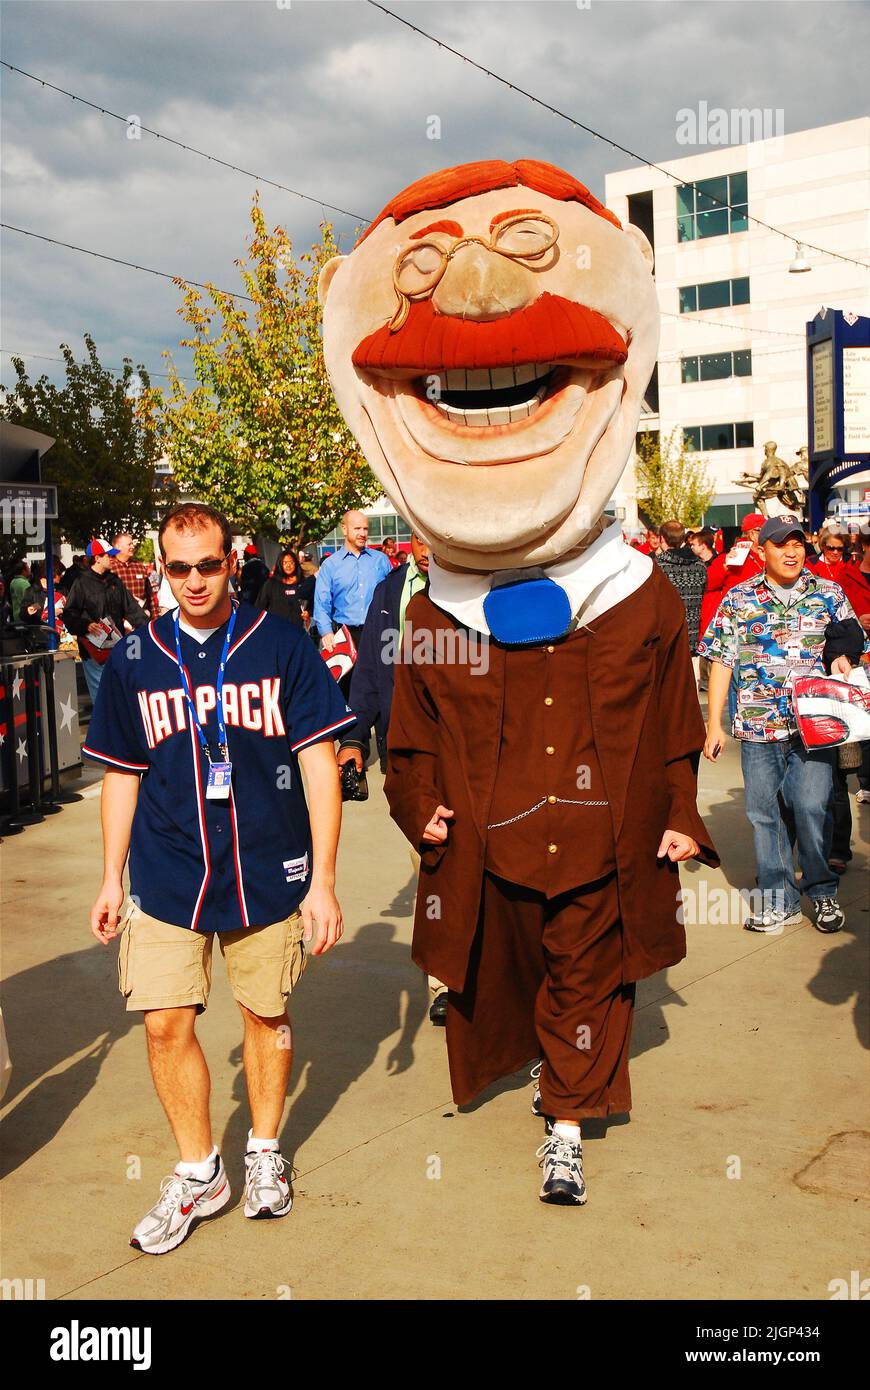 A large Caricature Teddy Roosevelt, one of the Presidents that walk through Washington Nationals Park during a baseball game, greets fans of the team Stock Photo